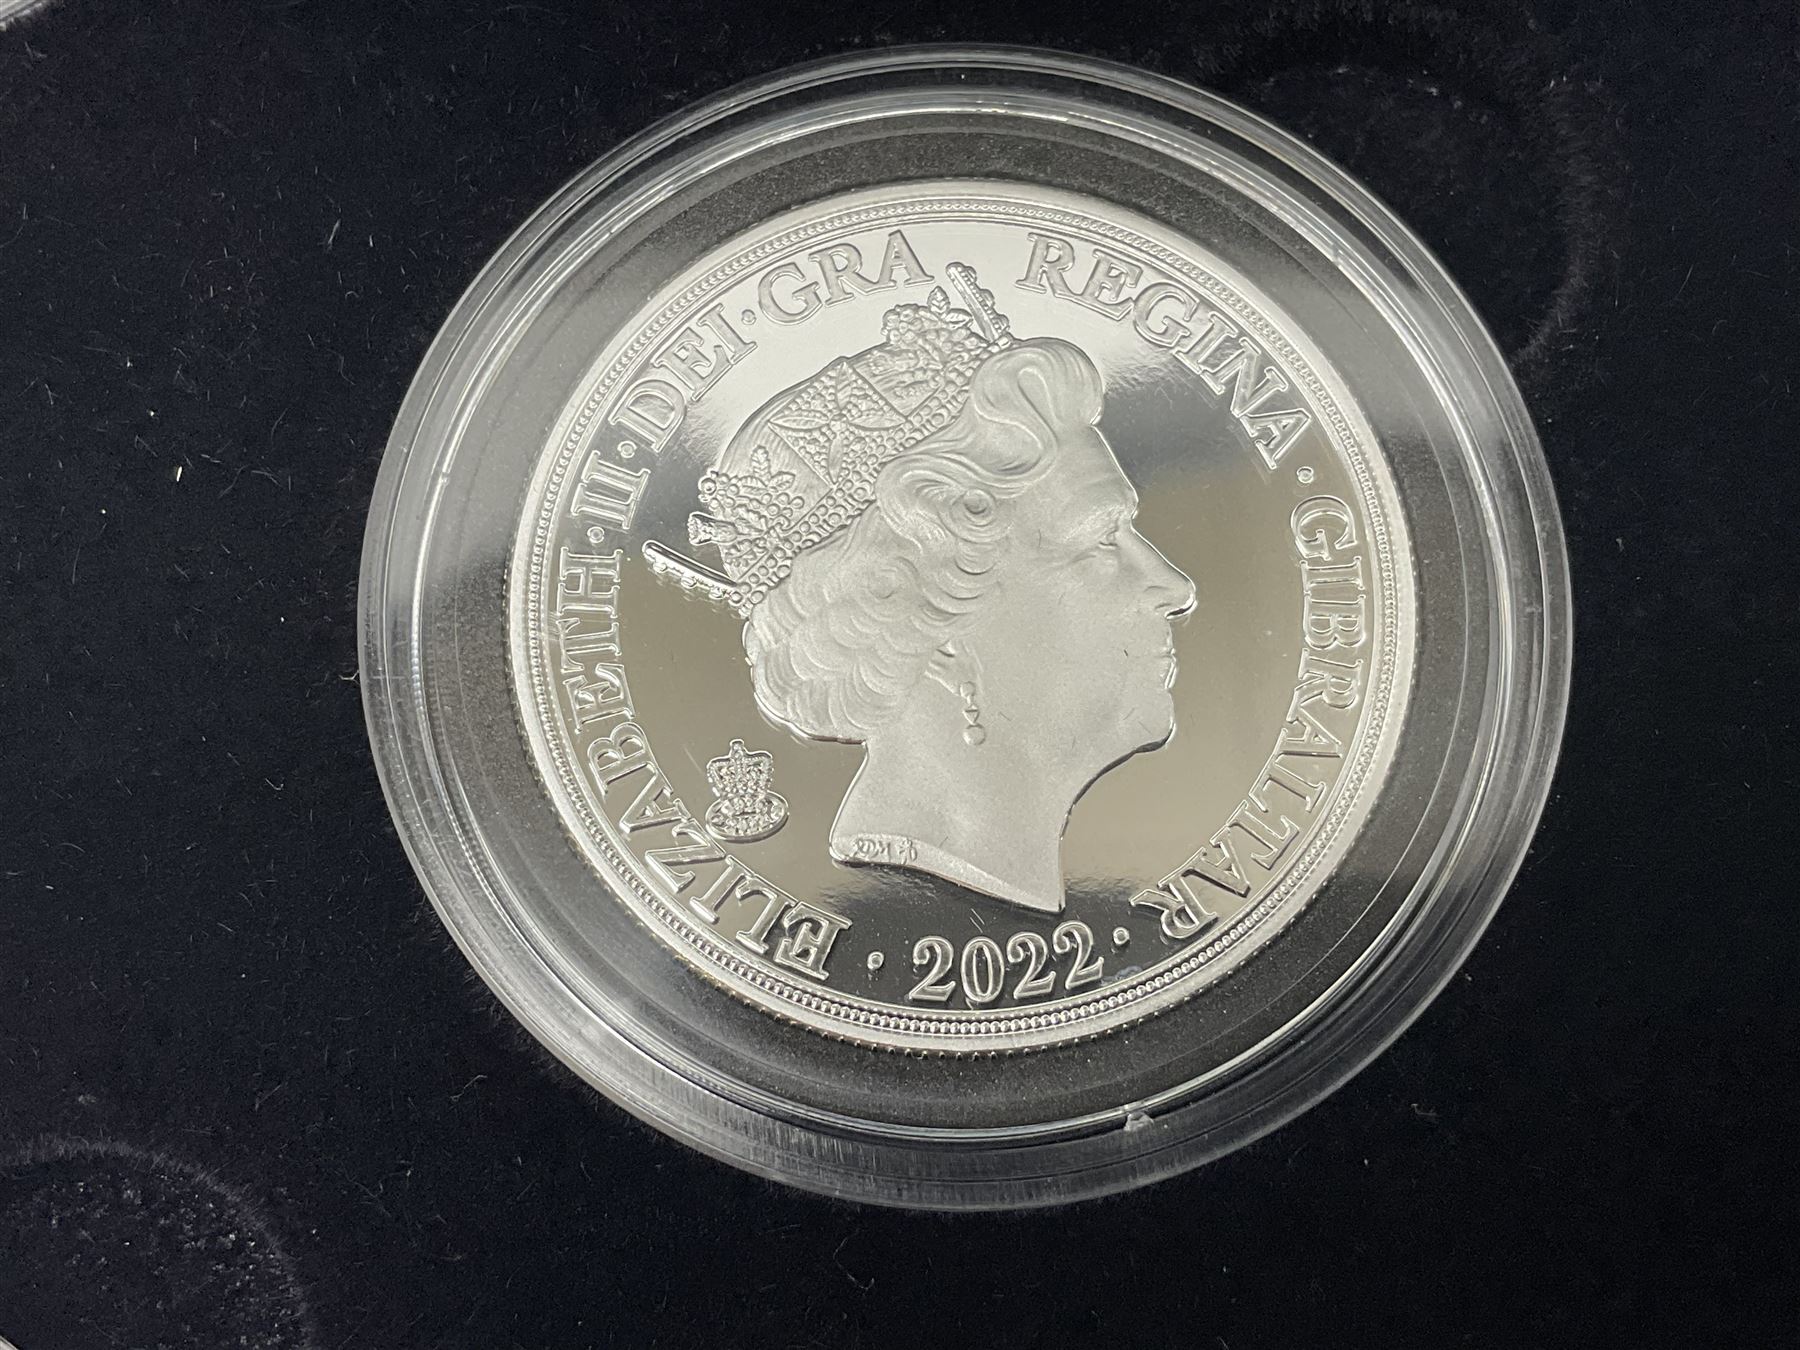 Queen Elizabeth II Gibraltar 2002 five coin silver-proof collection - Image 11 of 13